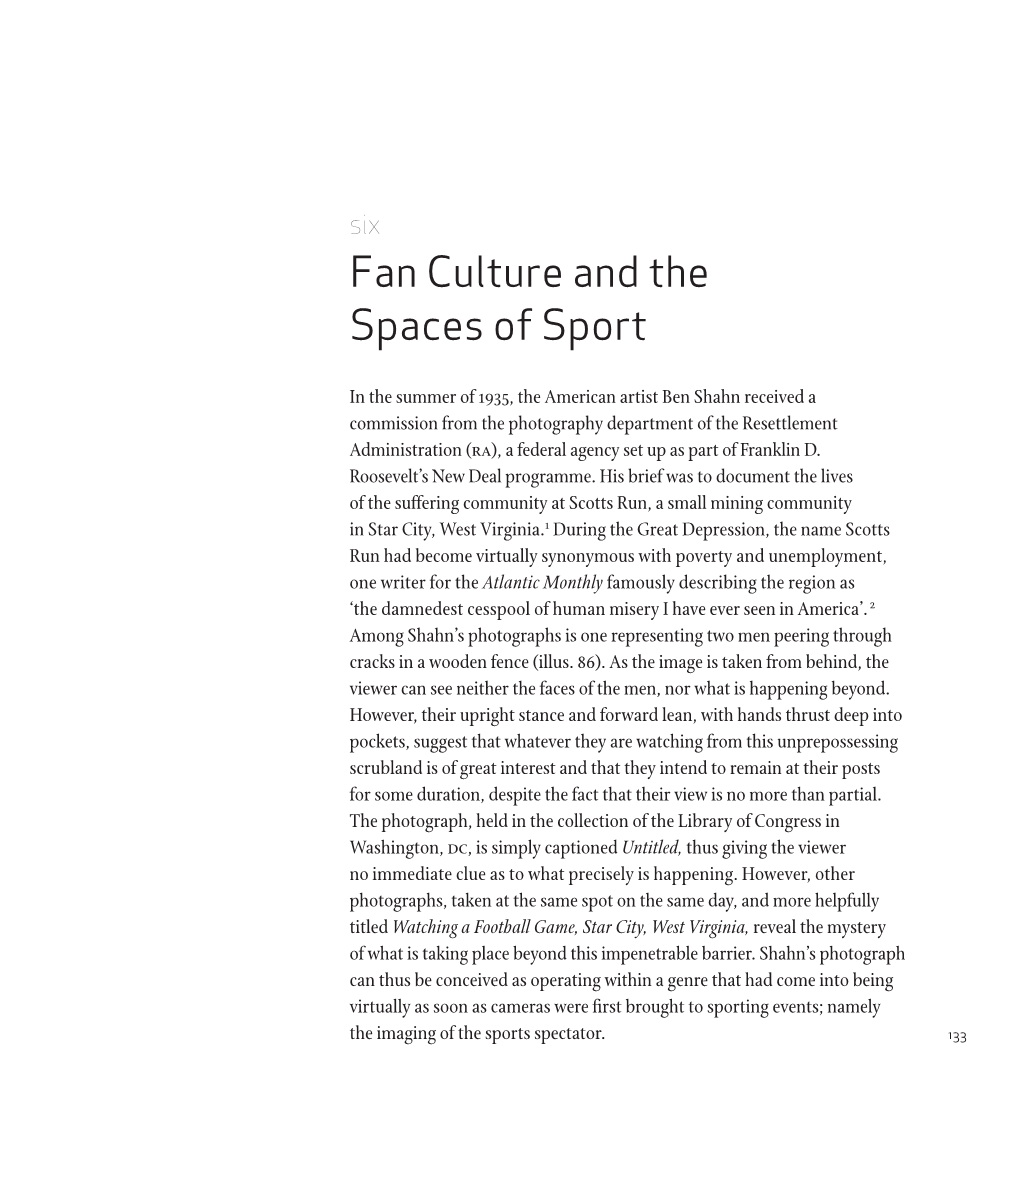 Fan Culture and the Spaces of Sport